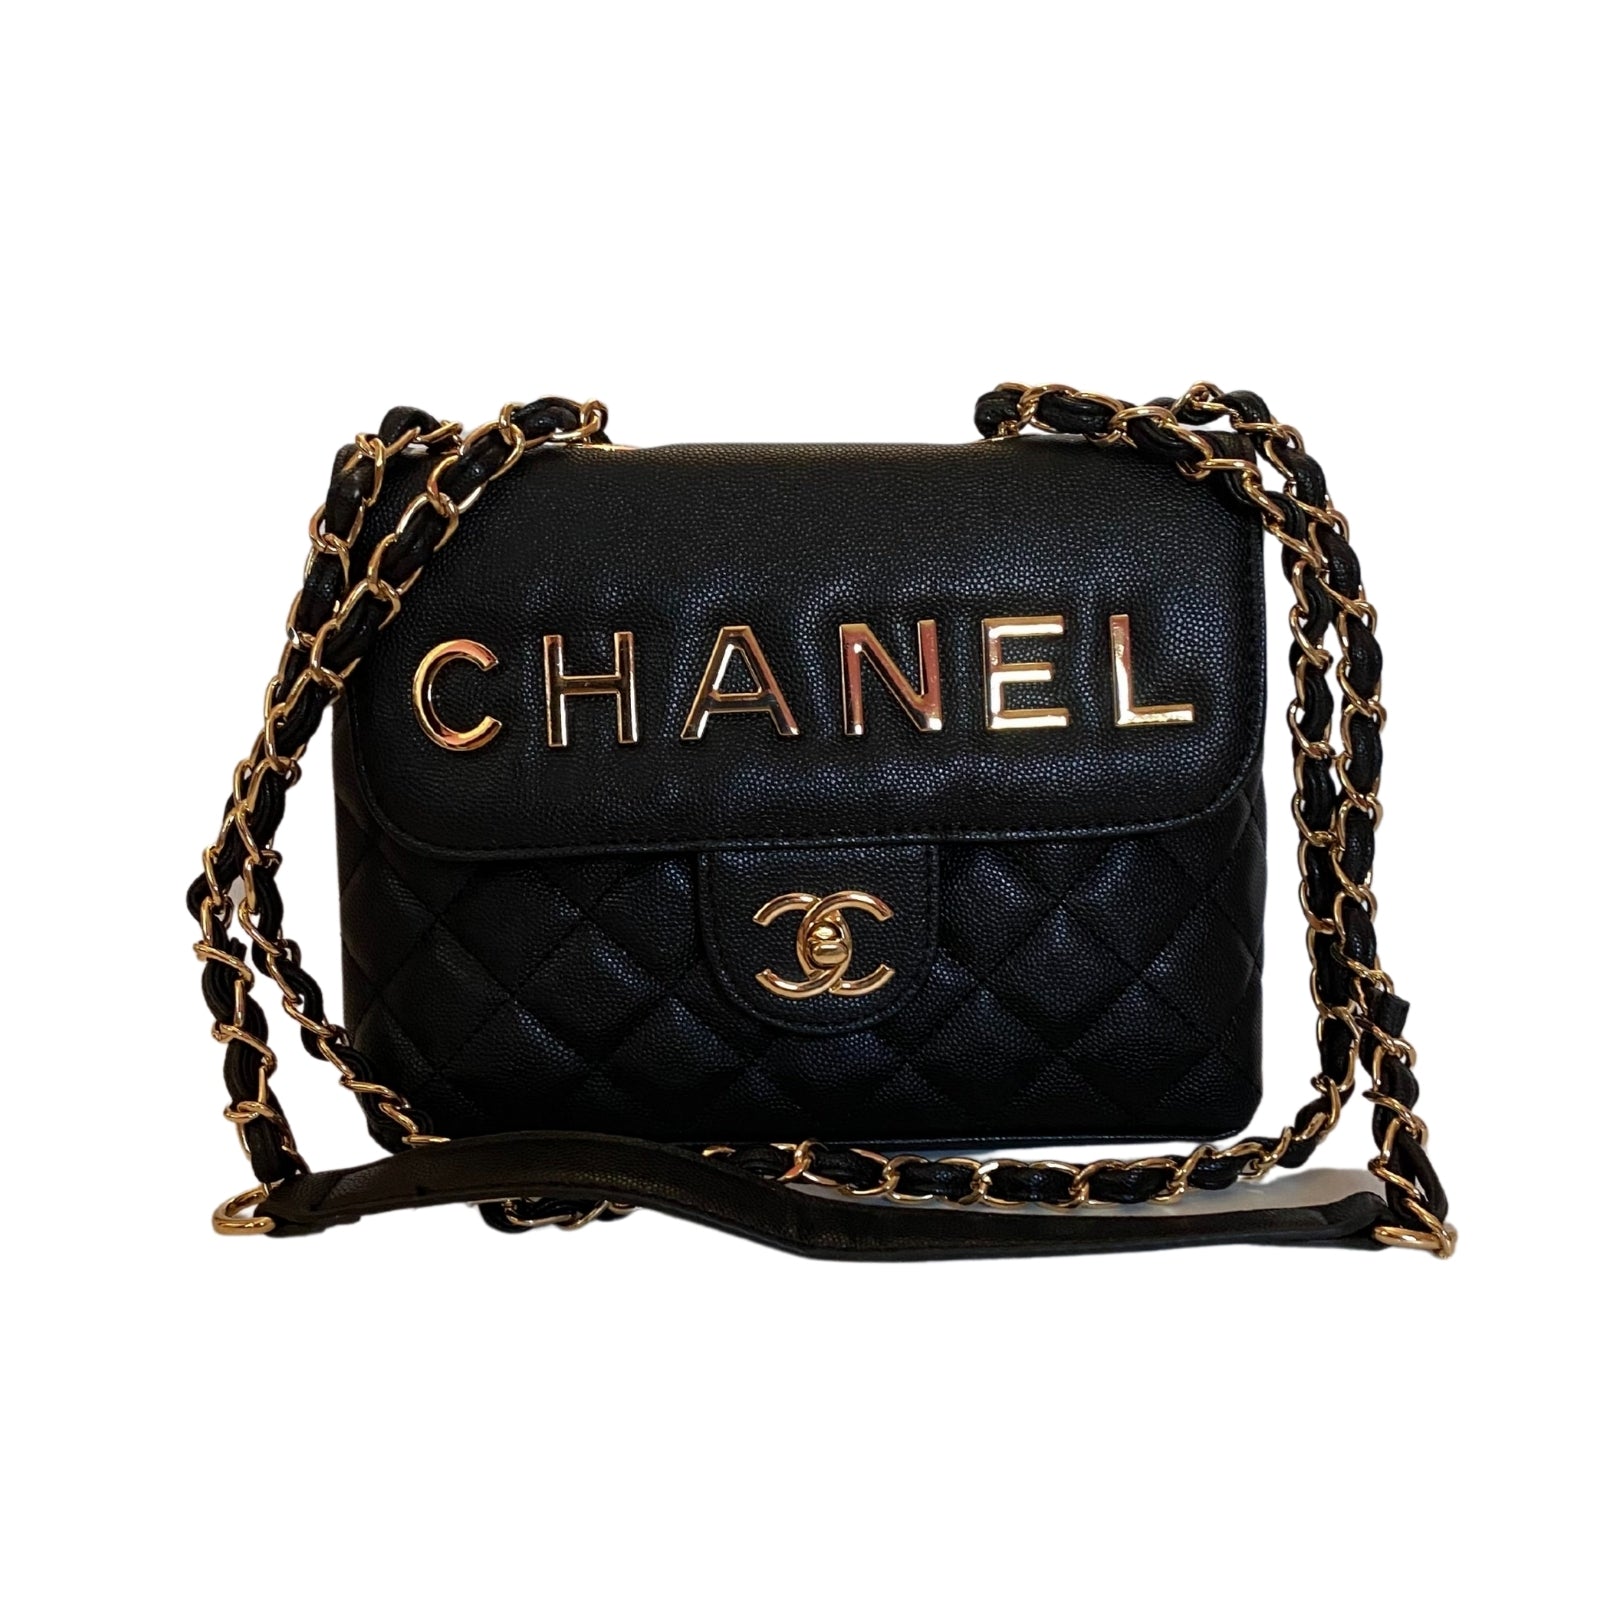 Chanel VIP Gift Black Wallet Chain Crossbody Shoulder Makeup Bag. Free  shipping and guaranteed authenticity on Chanel VIP Gift …